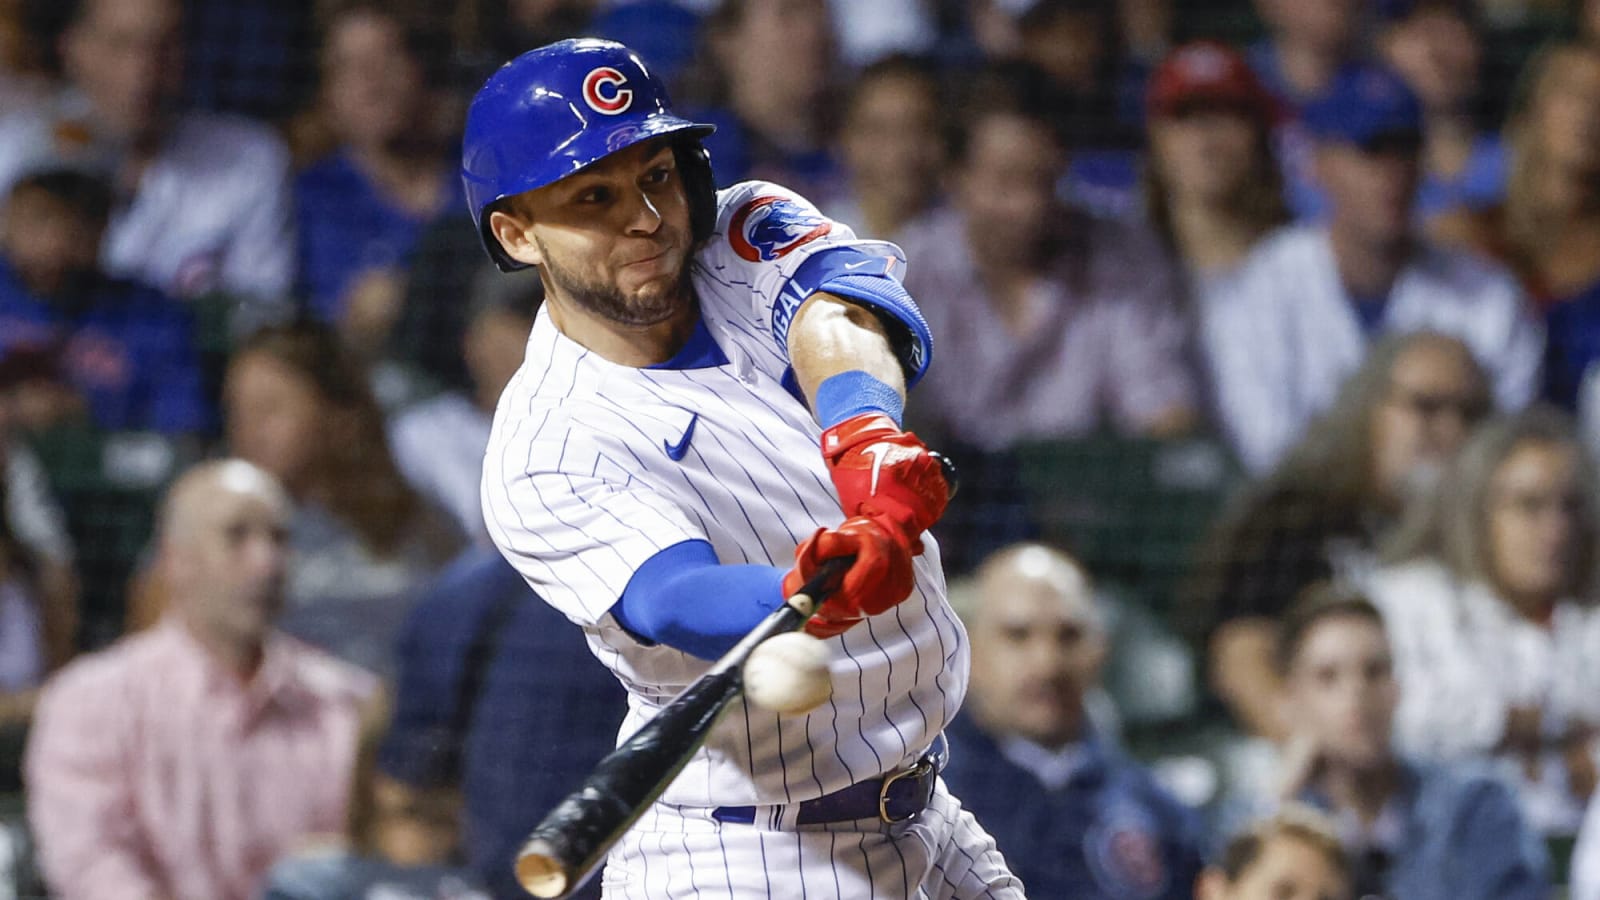 Cubs hot stove: With Nick Madrigal as the odd man out, could the Cubs trade him?